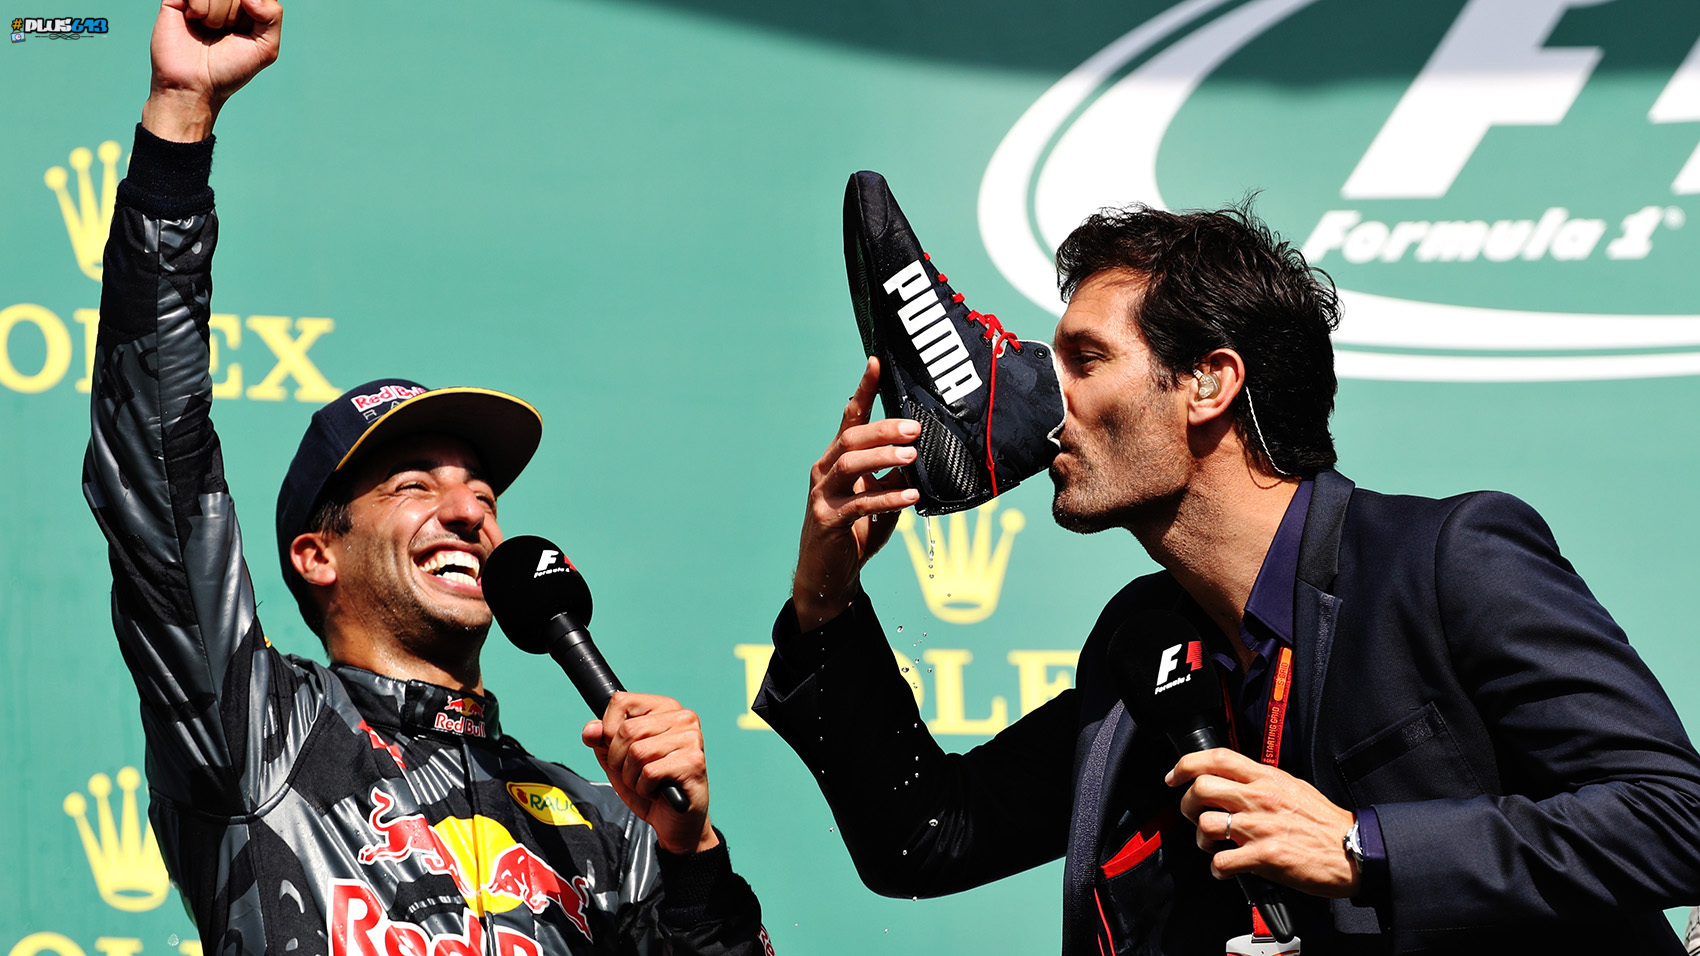 plus613 - culture in the blender - Mark Webber does a shoey from Daniel ...